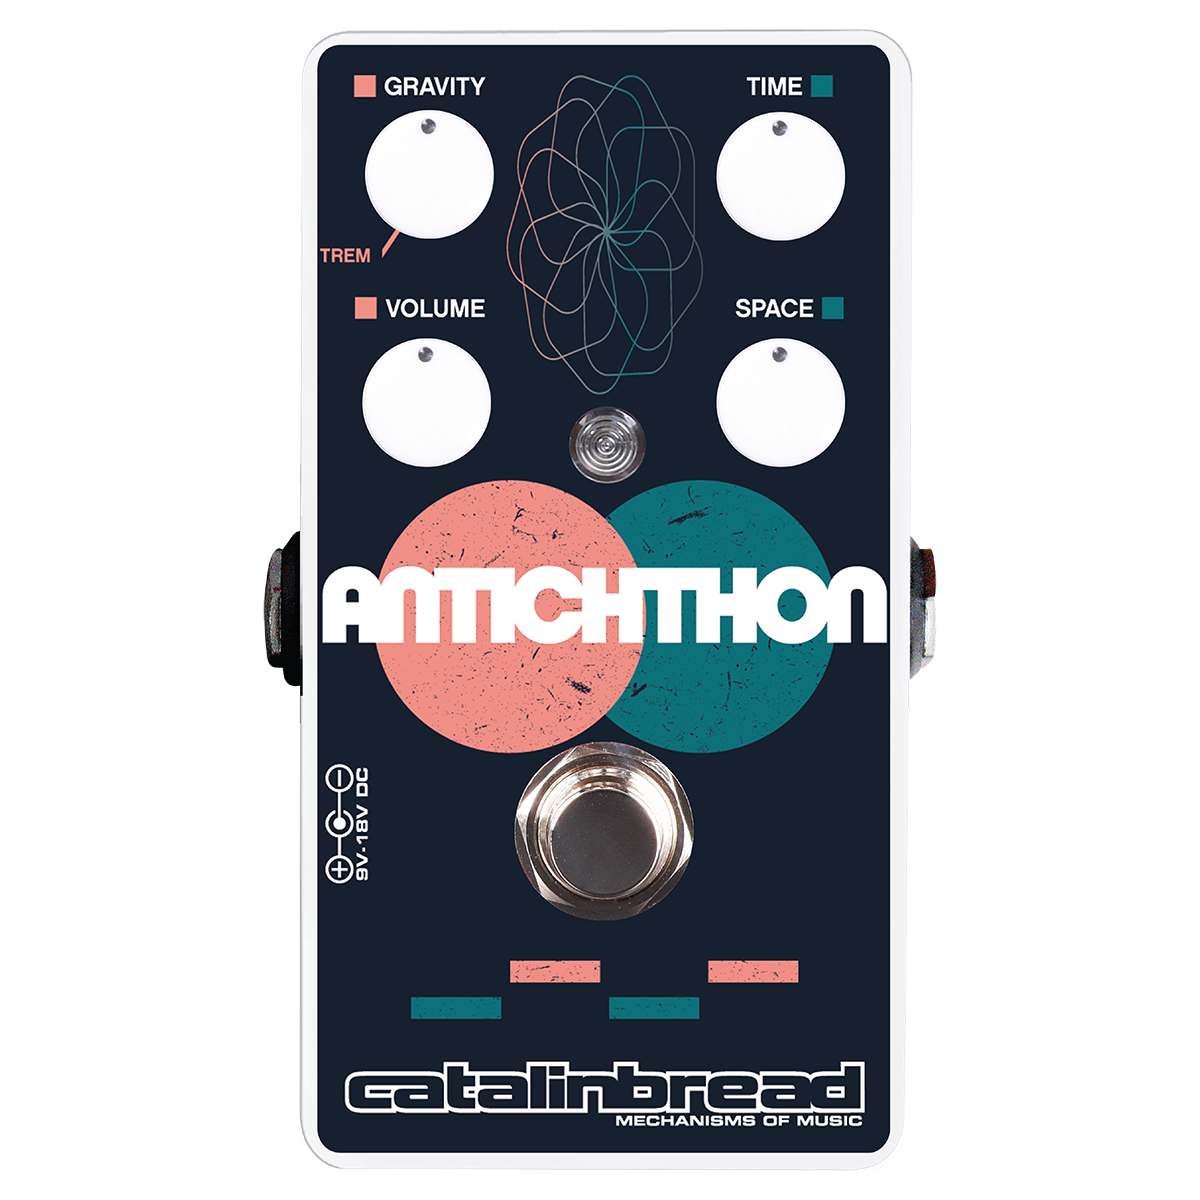 Antichthon (Circles Limited Edition)